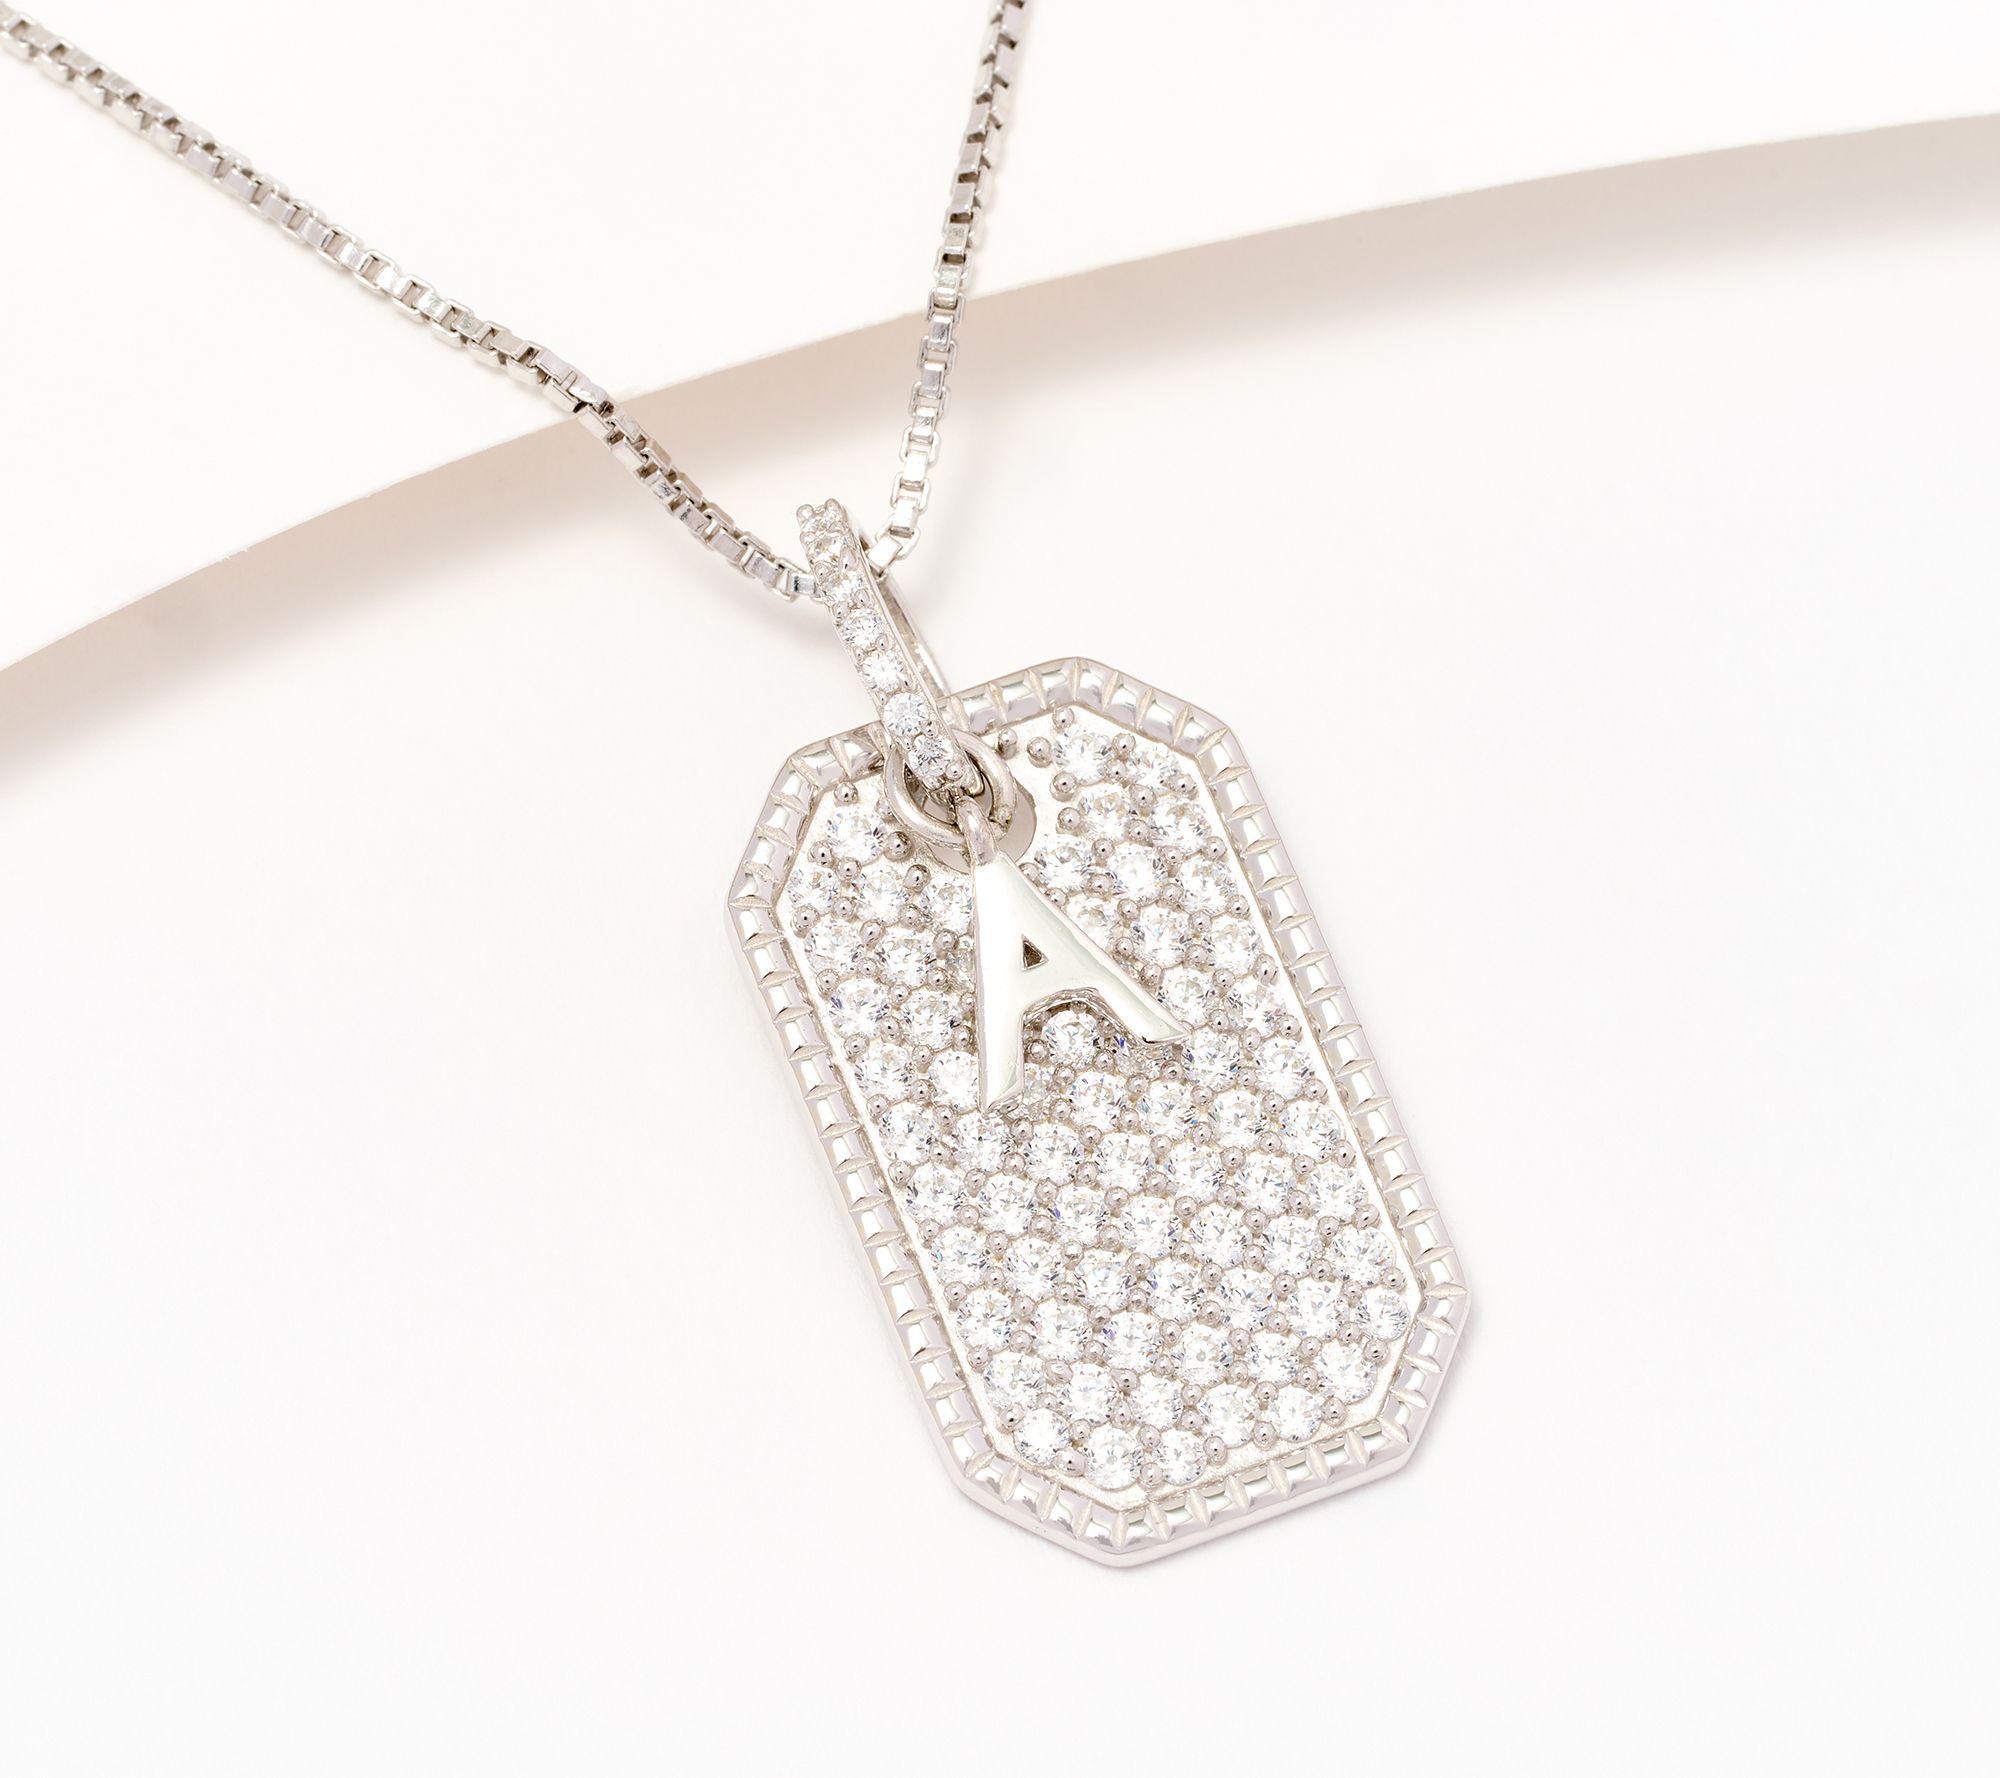 Mens White Cubic Zirconia Sterling Silver Dog Tag Pendant Necklace | One Size | Necklaces + Pendants Pendant Necklaces | Valentine's Day